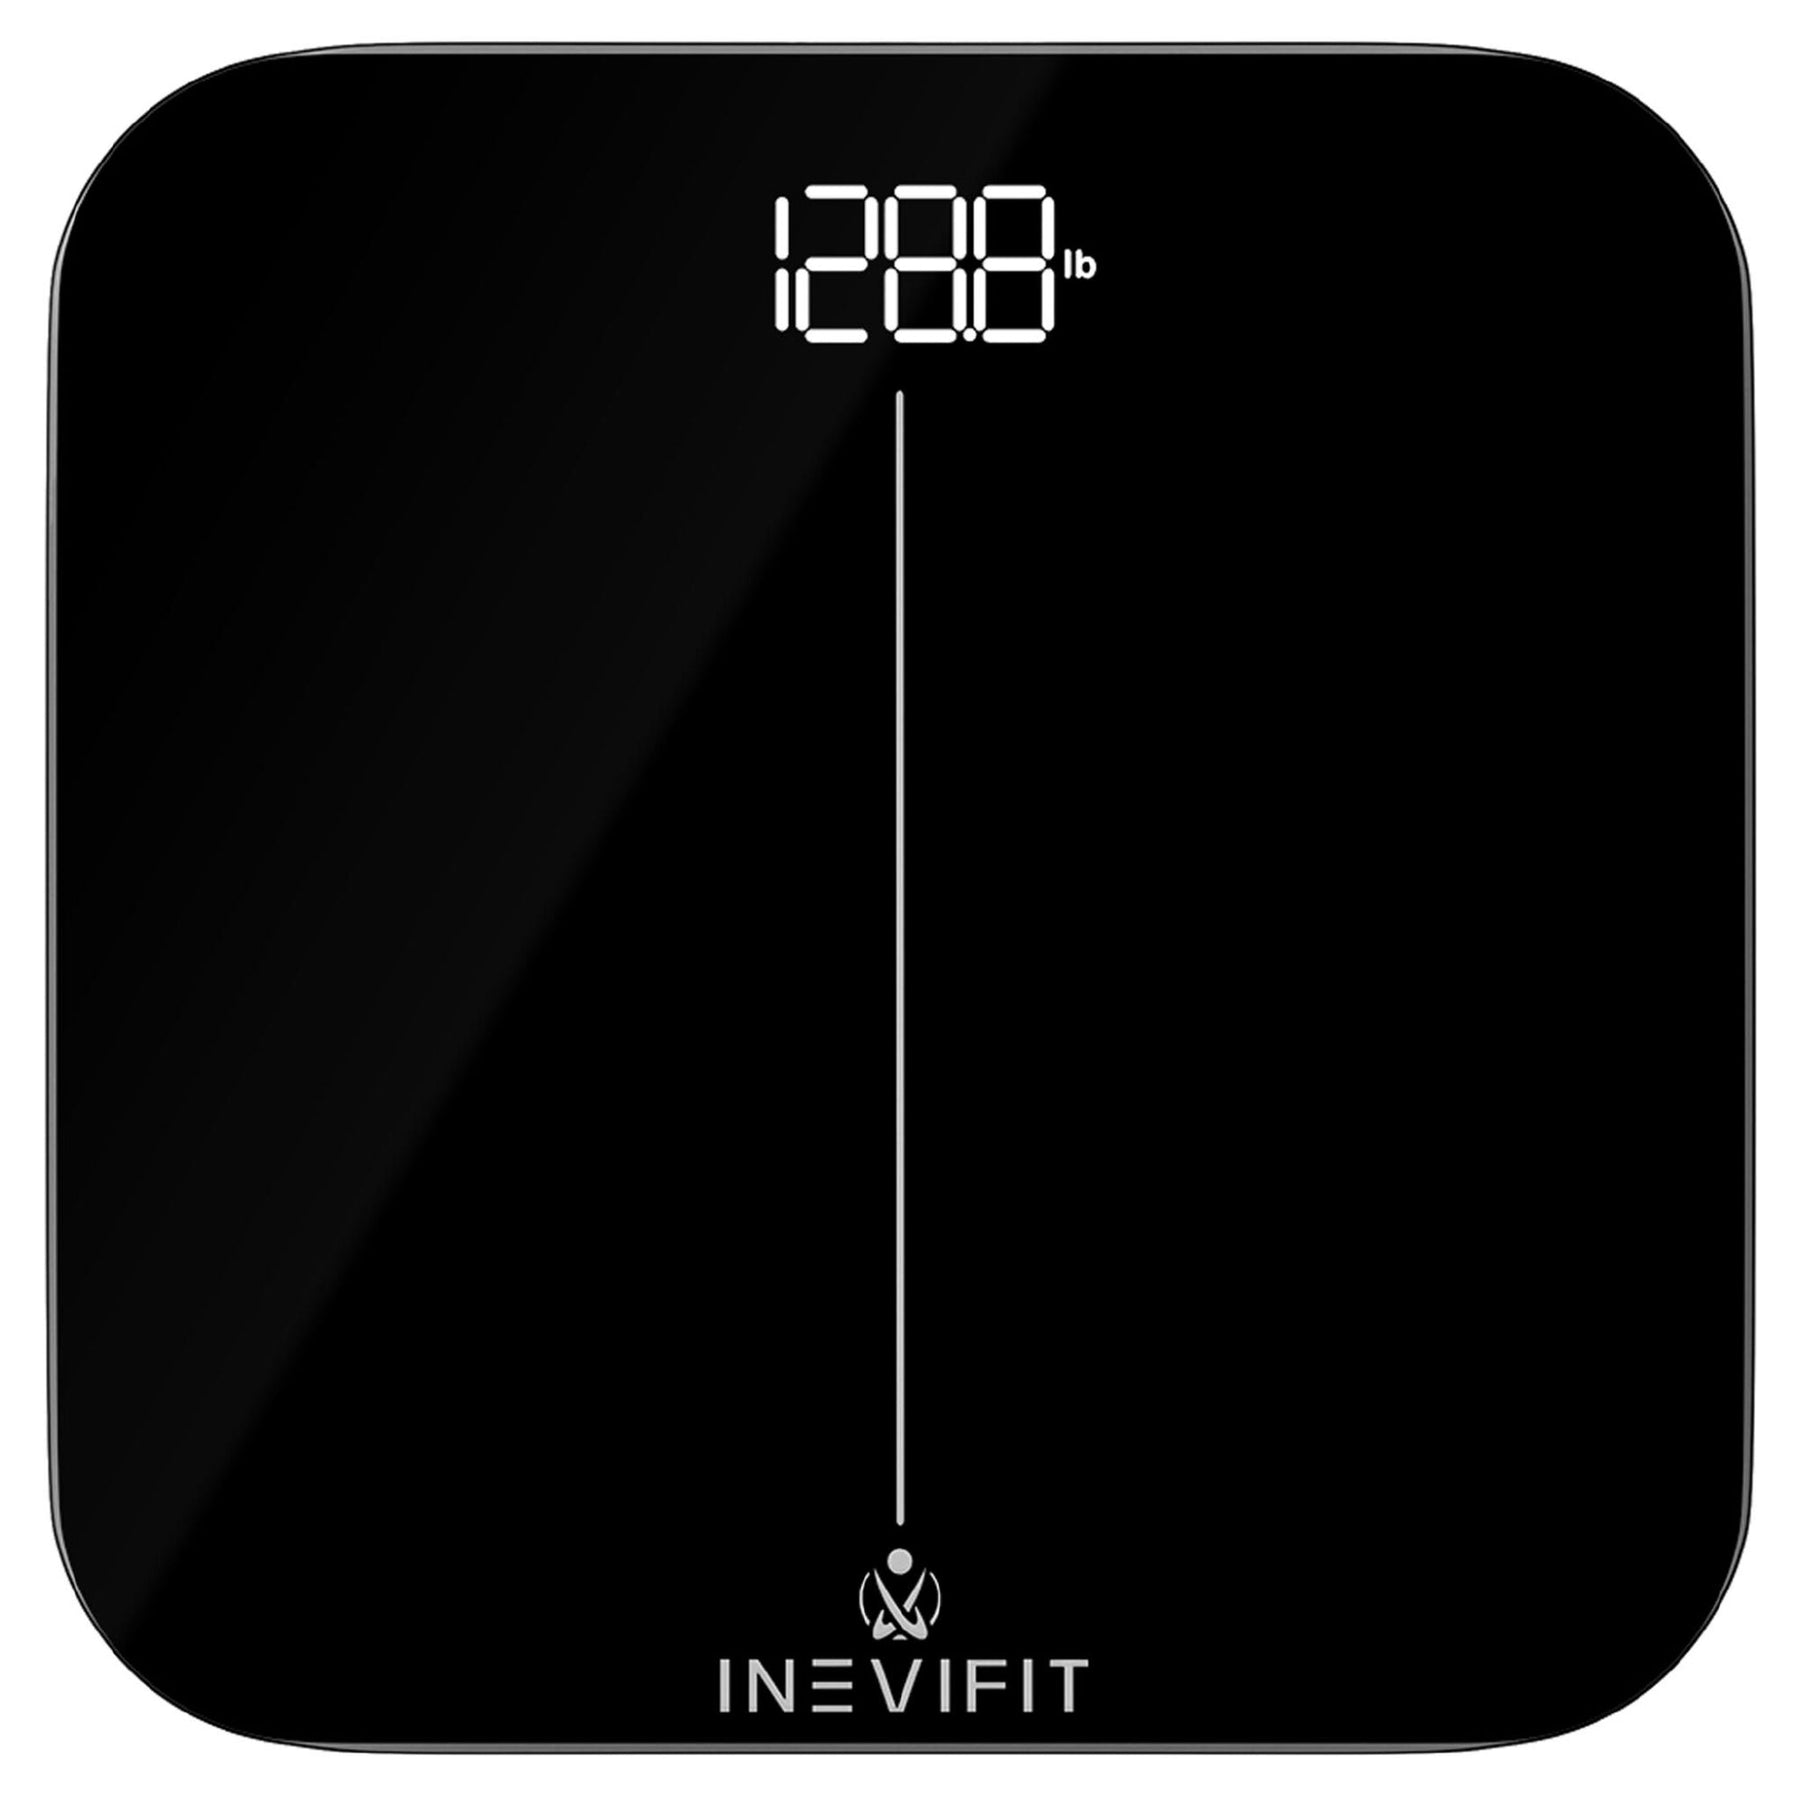 Digital Bathroom Body Weight Scale with LCD Display Backlight, Highly Accurate  Weight Scale for Family Use and Weight up to 400 lbs, (Black) 